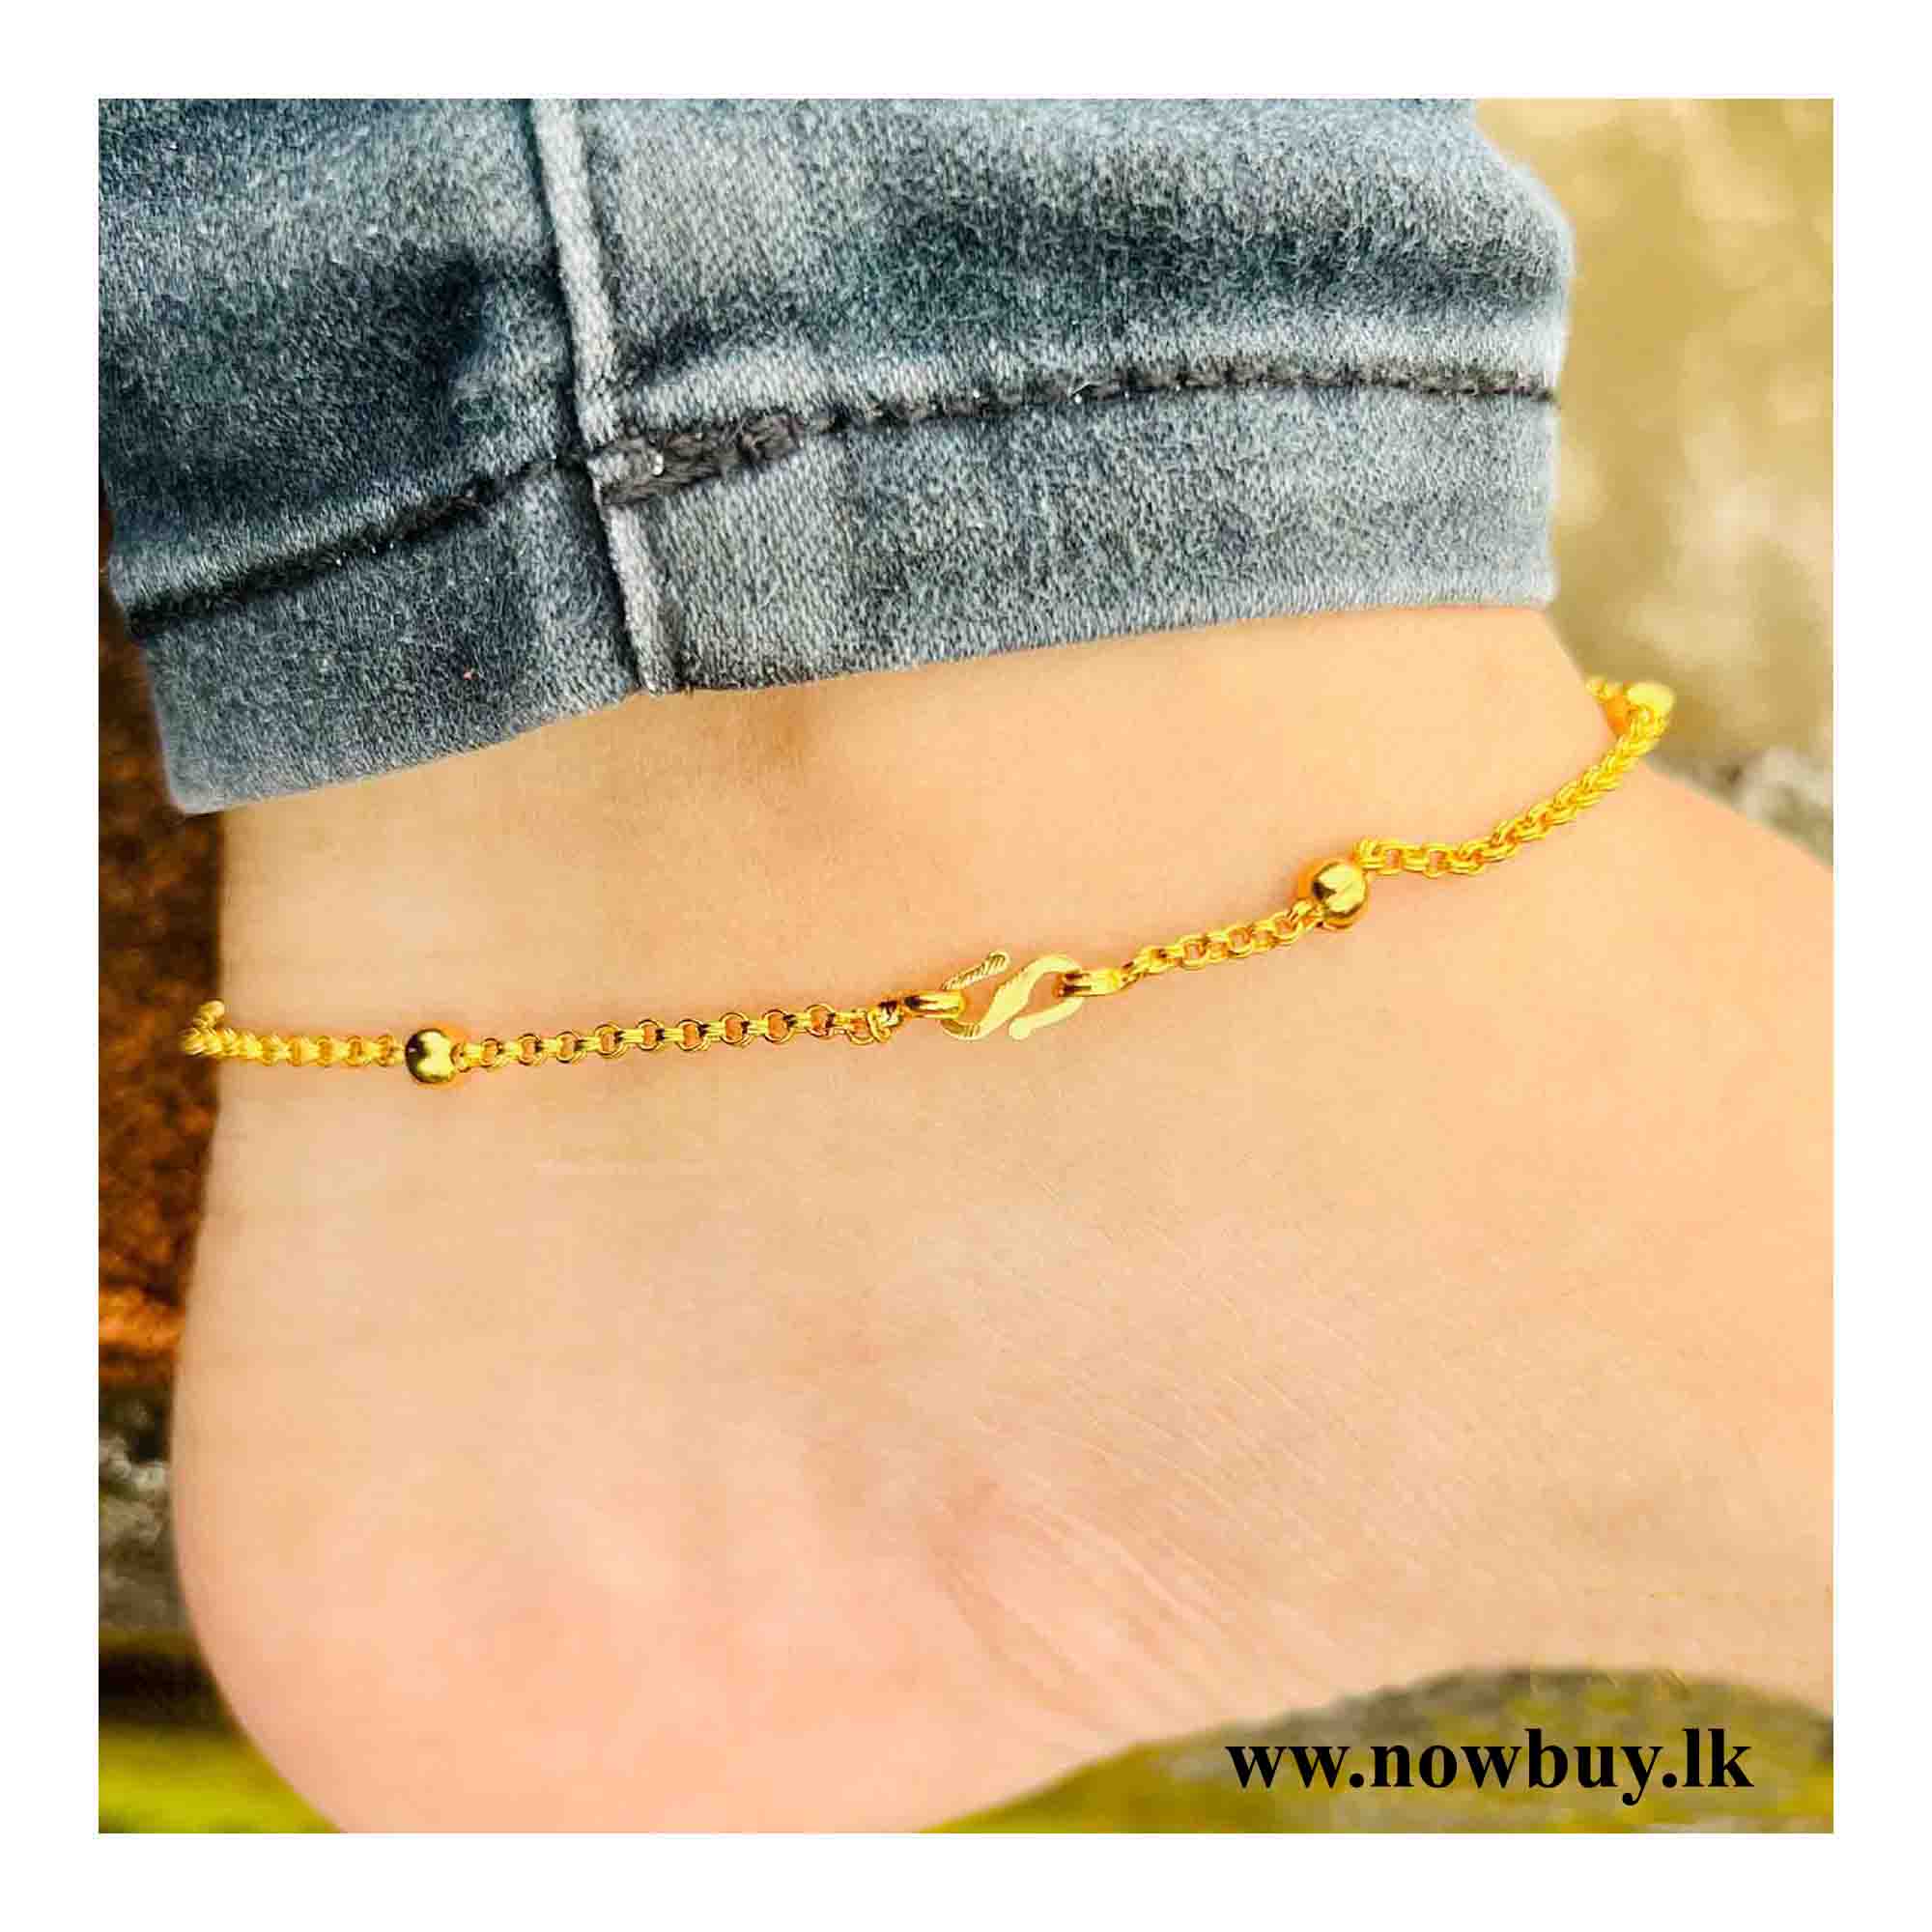 Gold Plated Ball Type Anklet Round Chain Kolusu Anklets NowBuy.lk 3